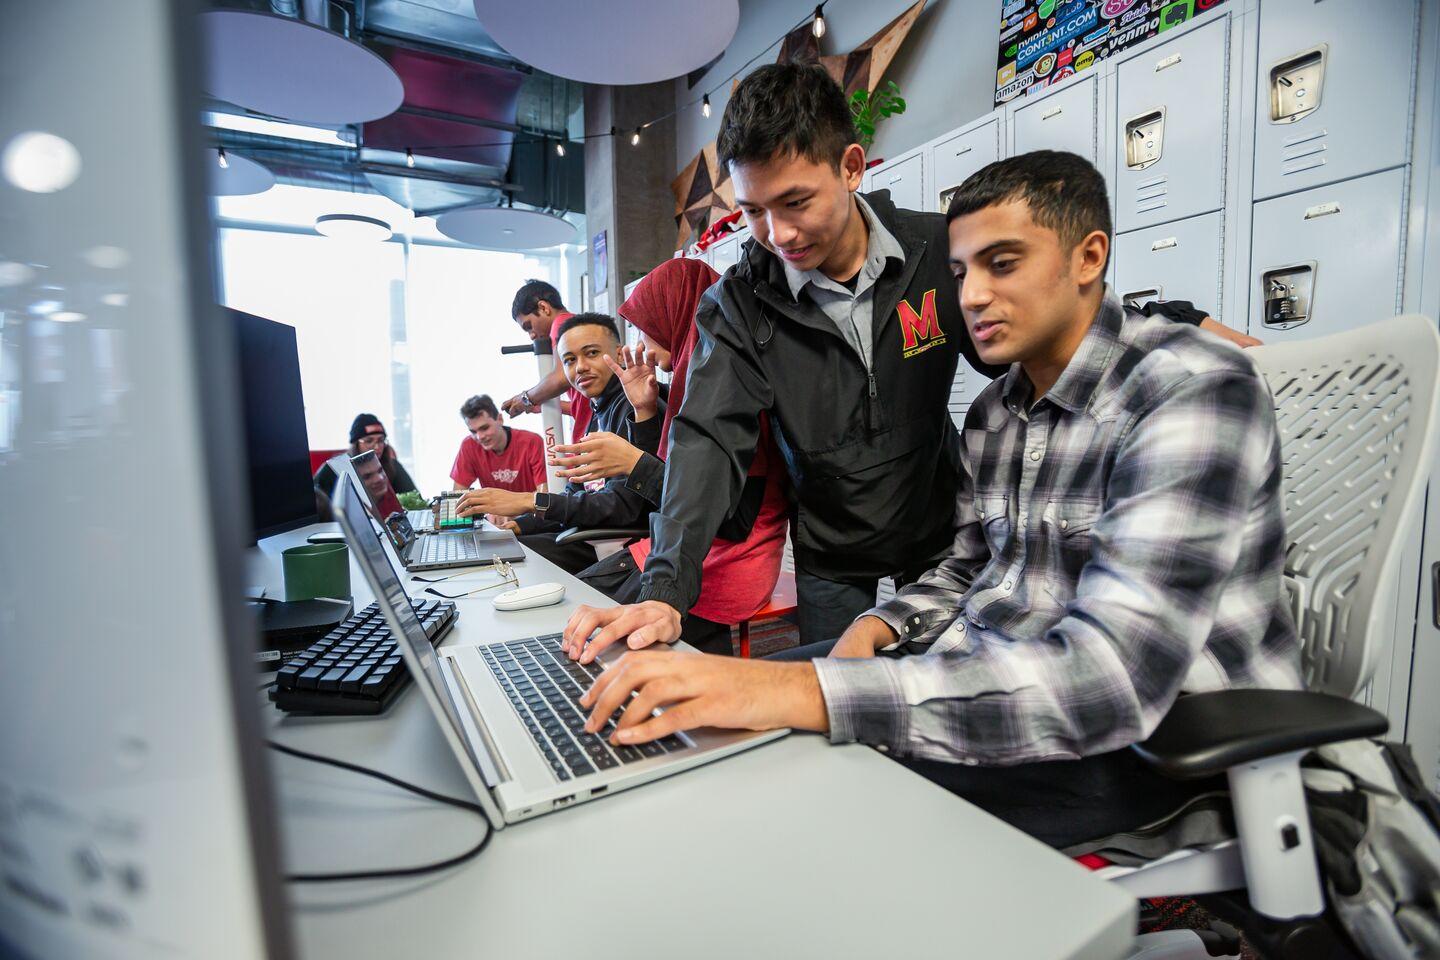 Students working in the Startup Shell suite, a student-run startup incubator and co-working space in the IDEA Factory.